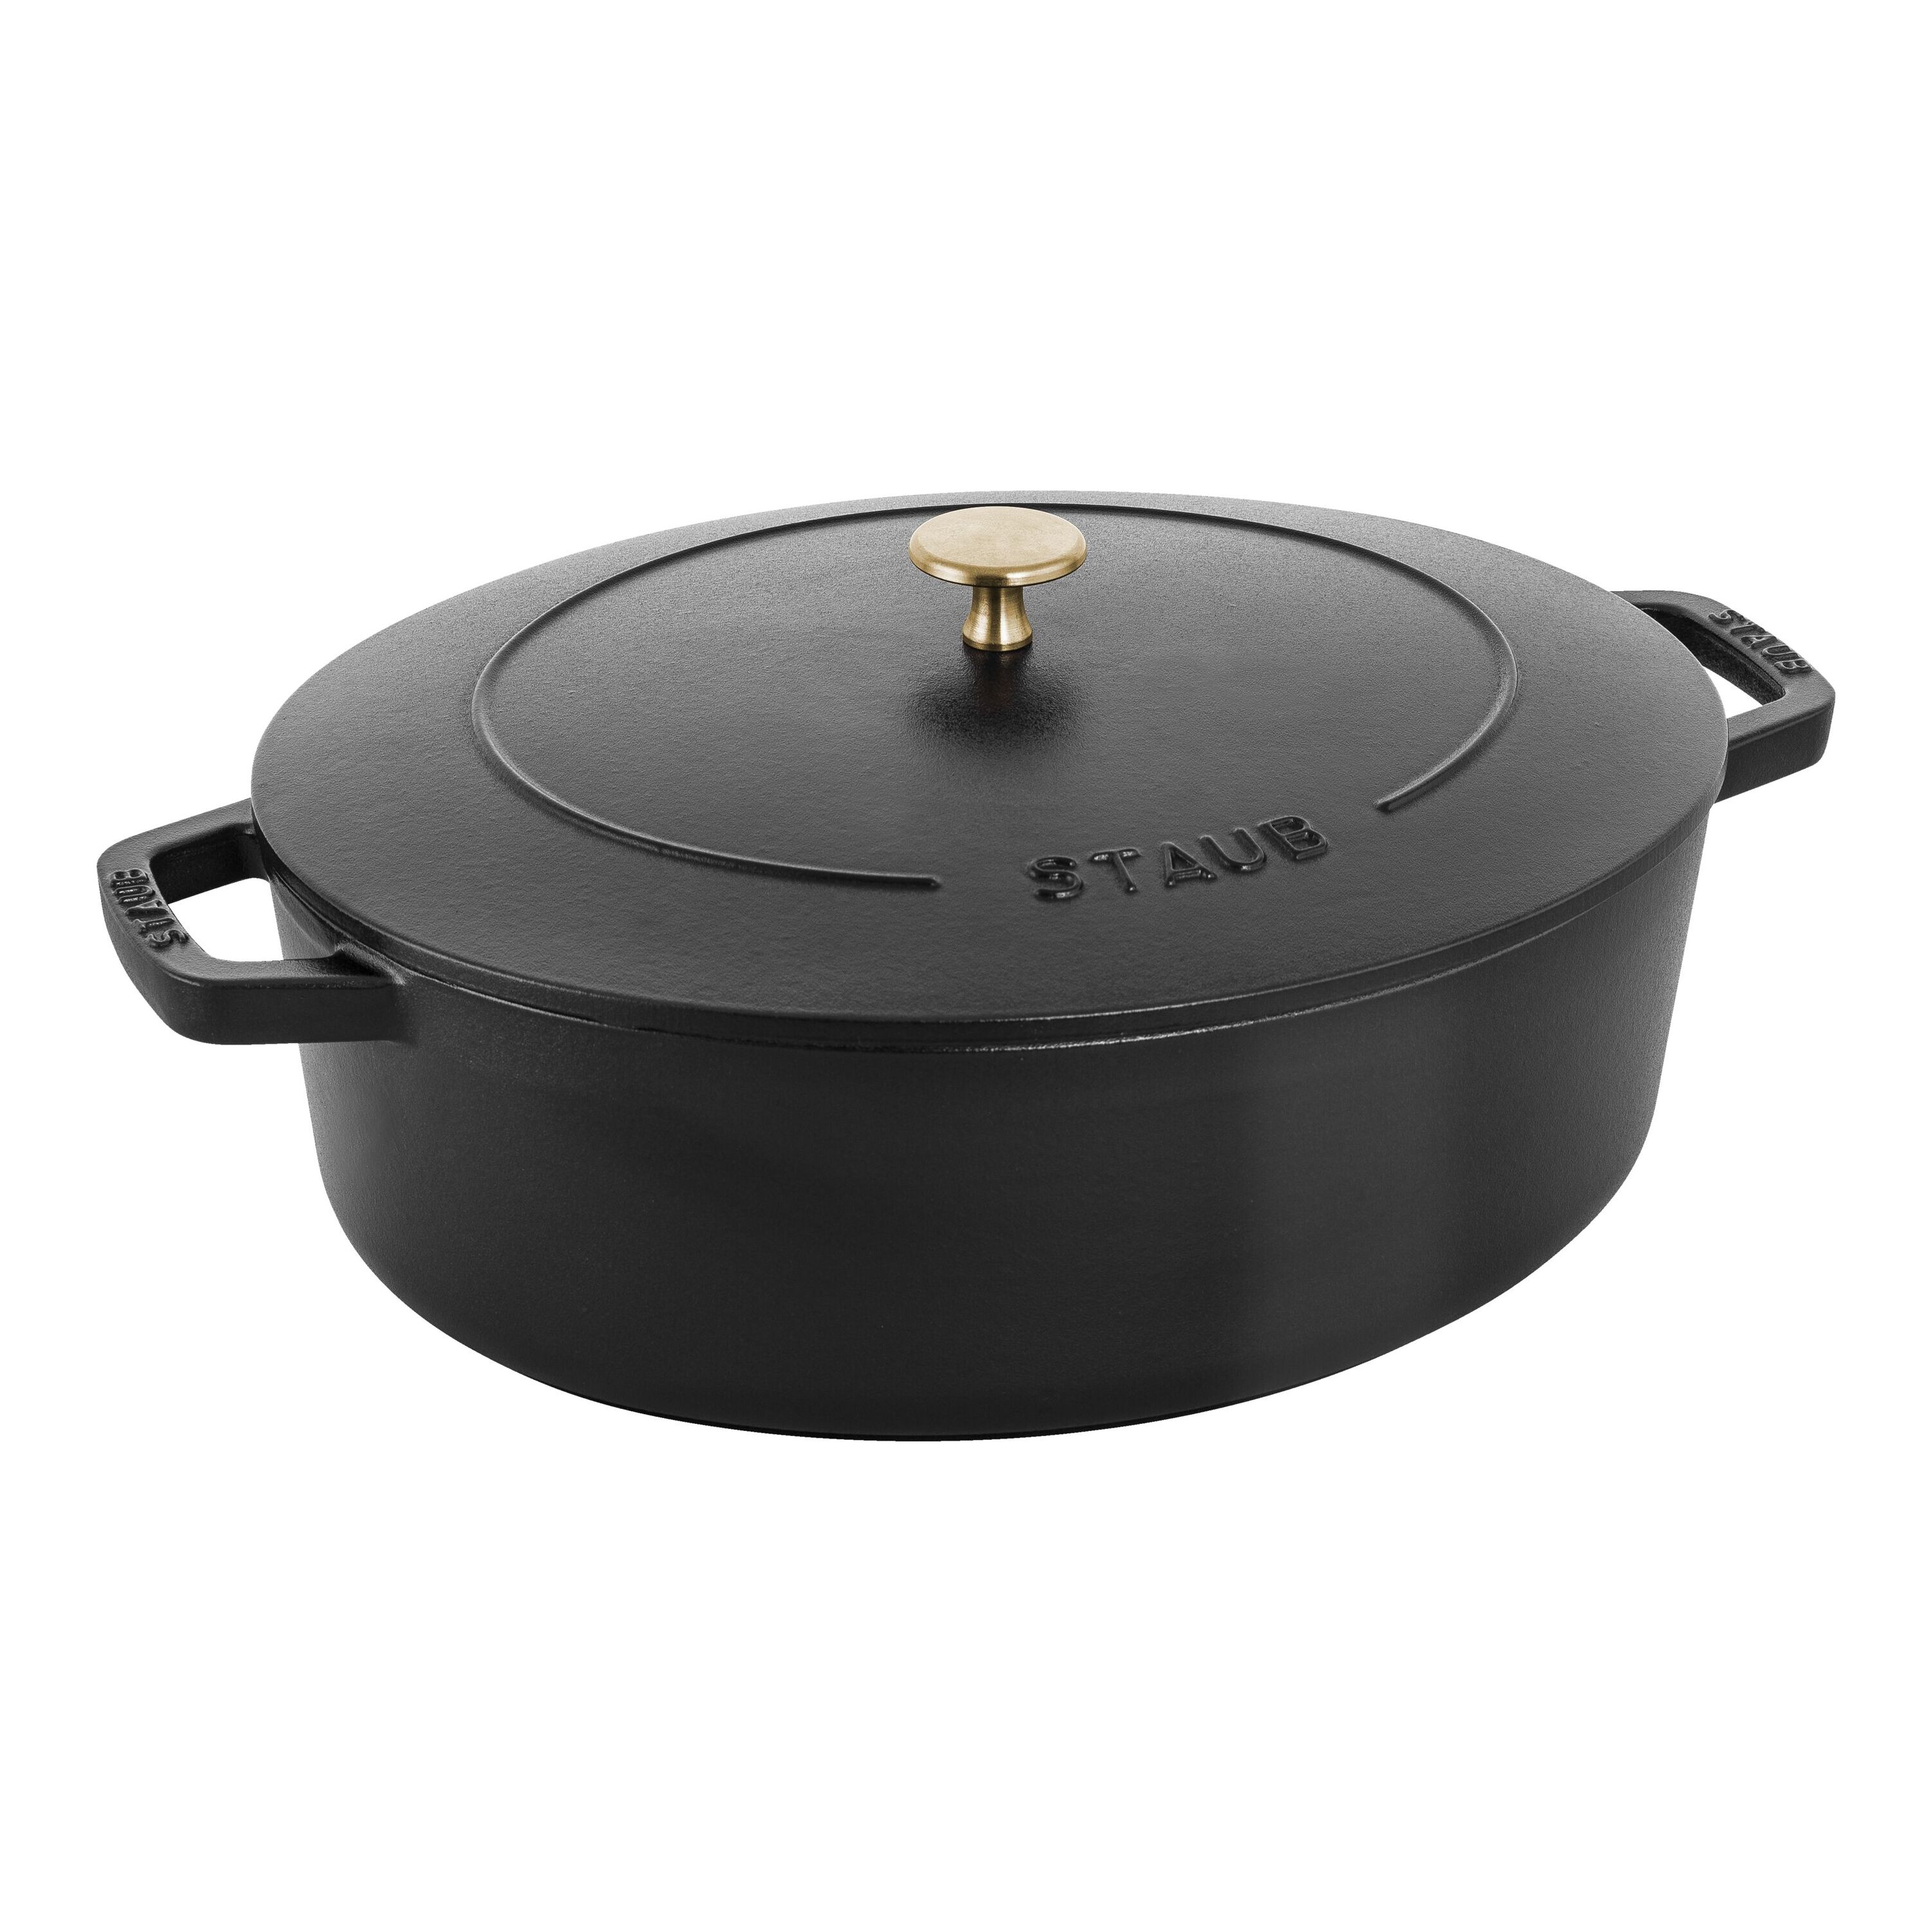 Buy Staub Cast Iron French oven | ZWILLING.COM